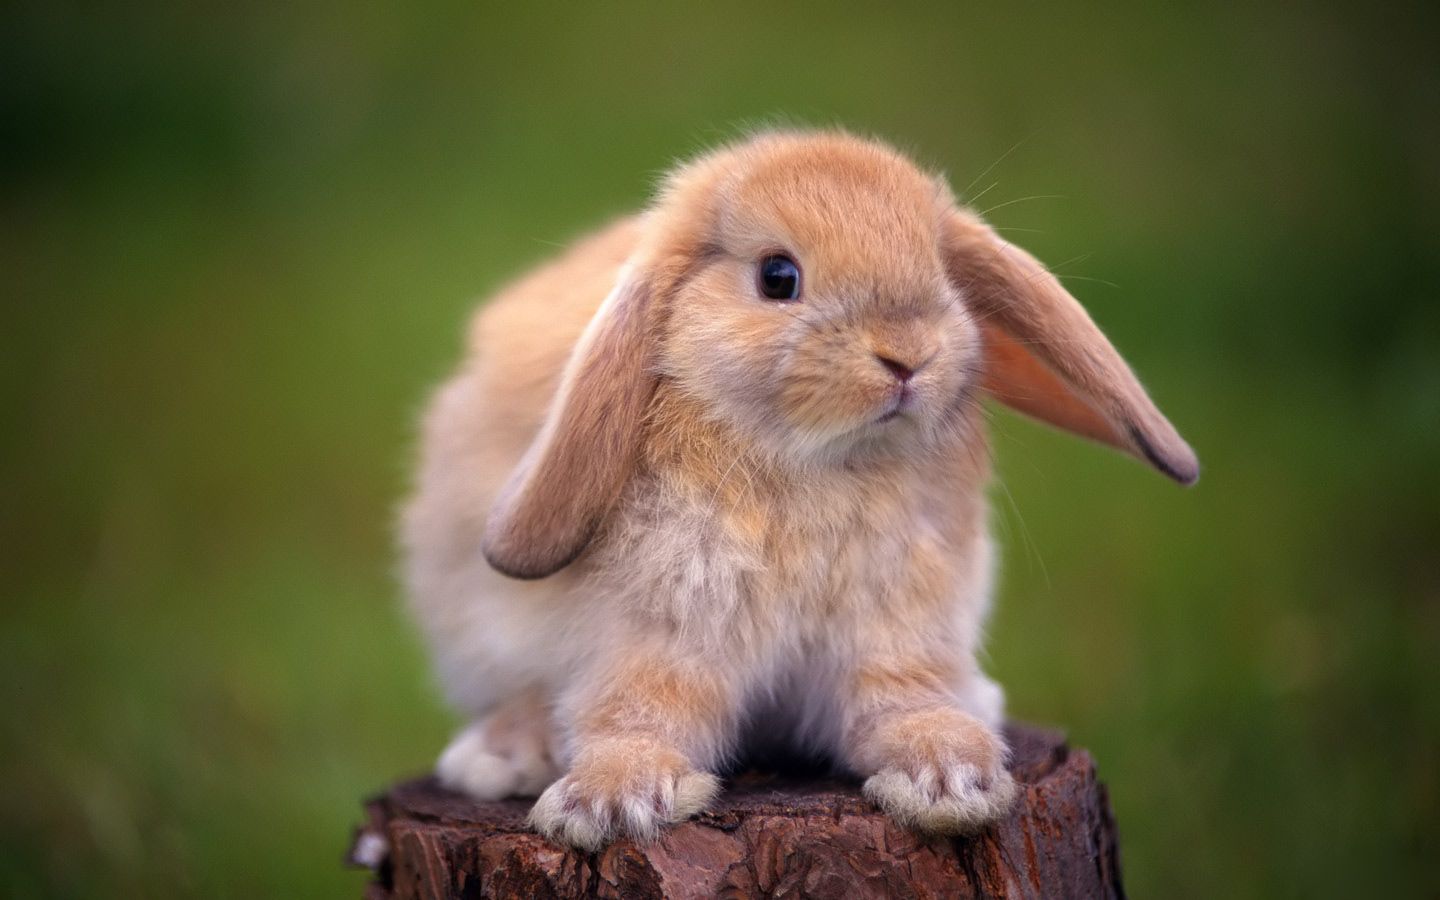 Free download Funny and Cute Rabbits Wallpaper My image [1440x900] for your Desktop, Mobile & Tablet. Explore Cute Bunnies Wallpaper. Baby Bunny Wallpaper, Bunny Wallpaper for Desktop, Wallpaper with Bunnies